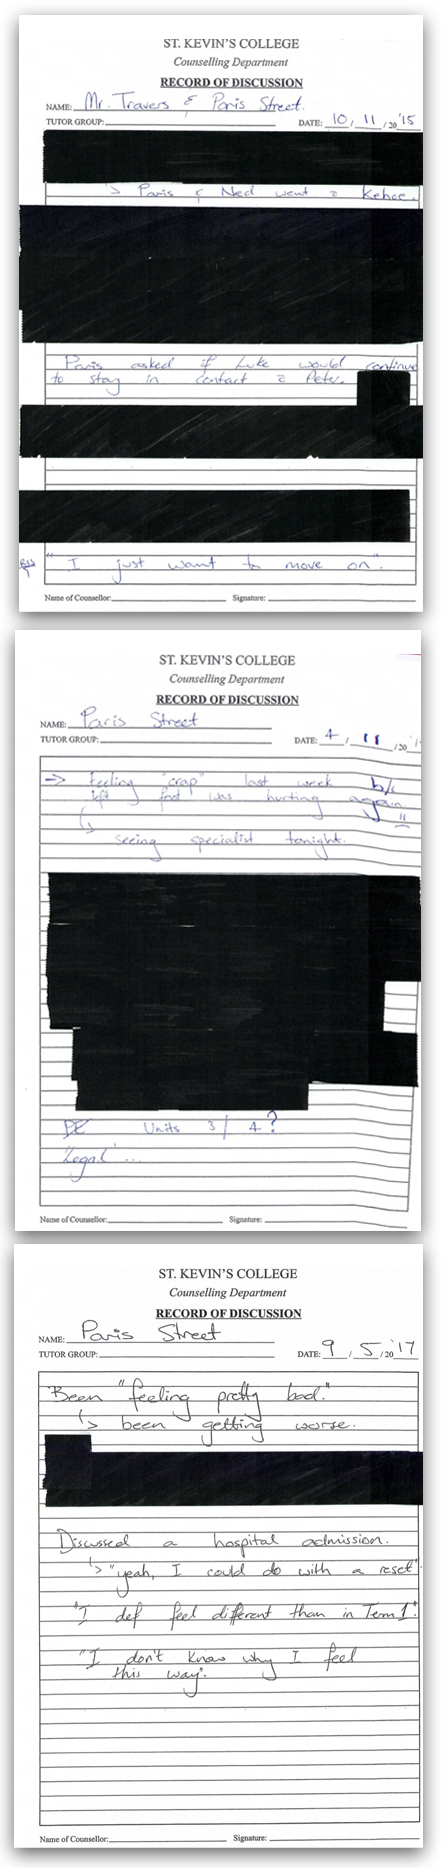 Paris Street's counselling notes were redacted by St Kevin's College.